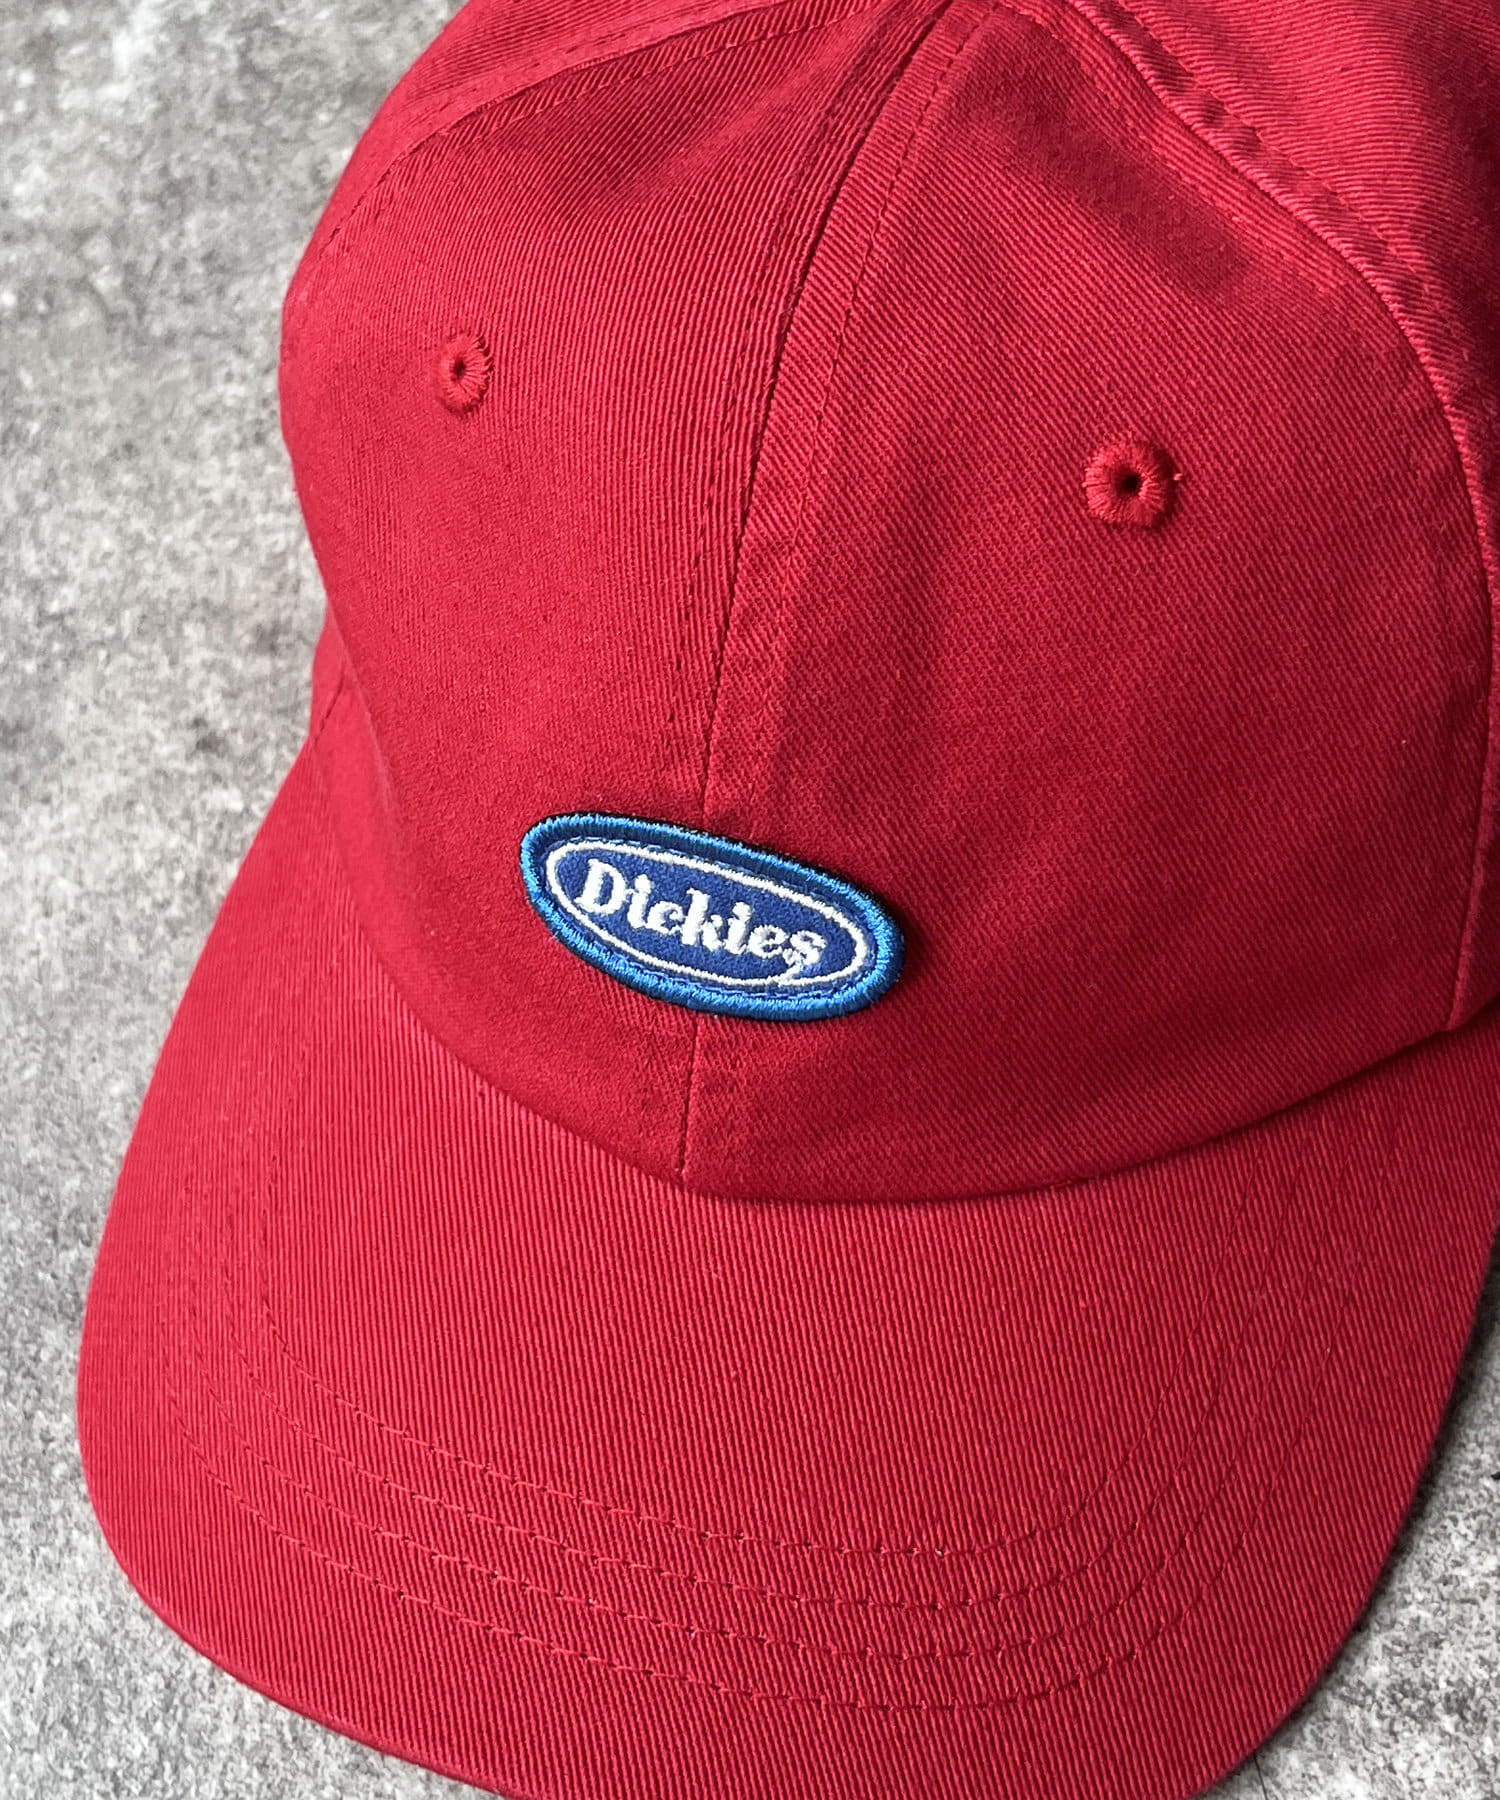 CPCM(シーピーシーエム) 【Dickies】ワッペンキャップ